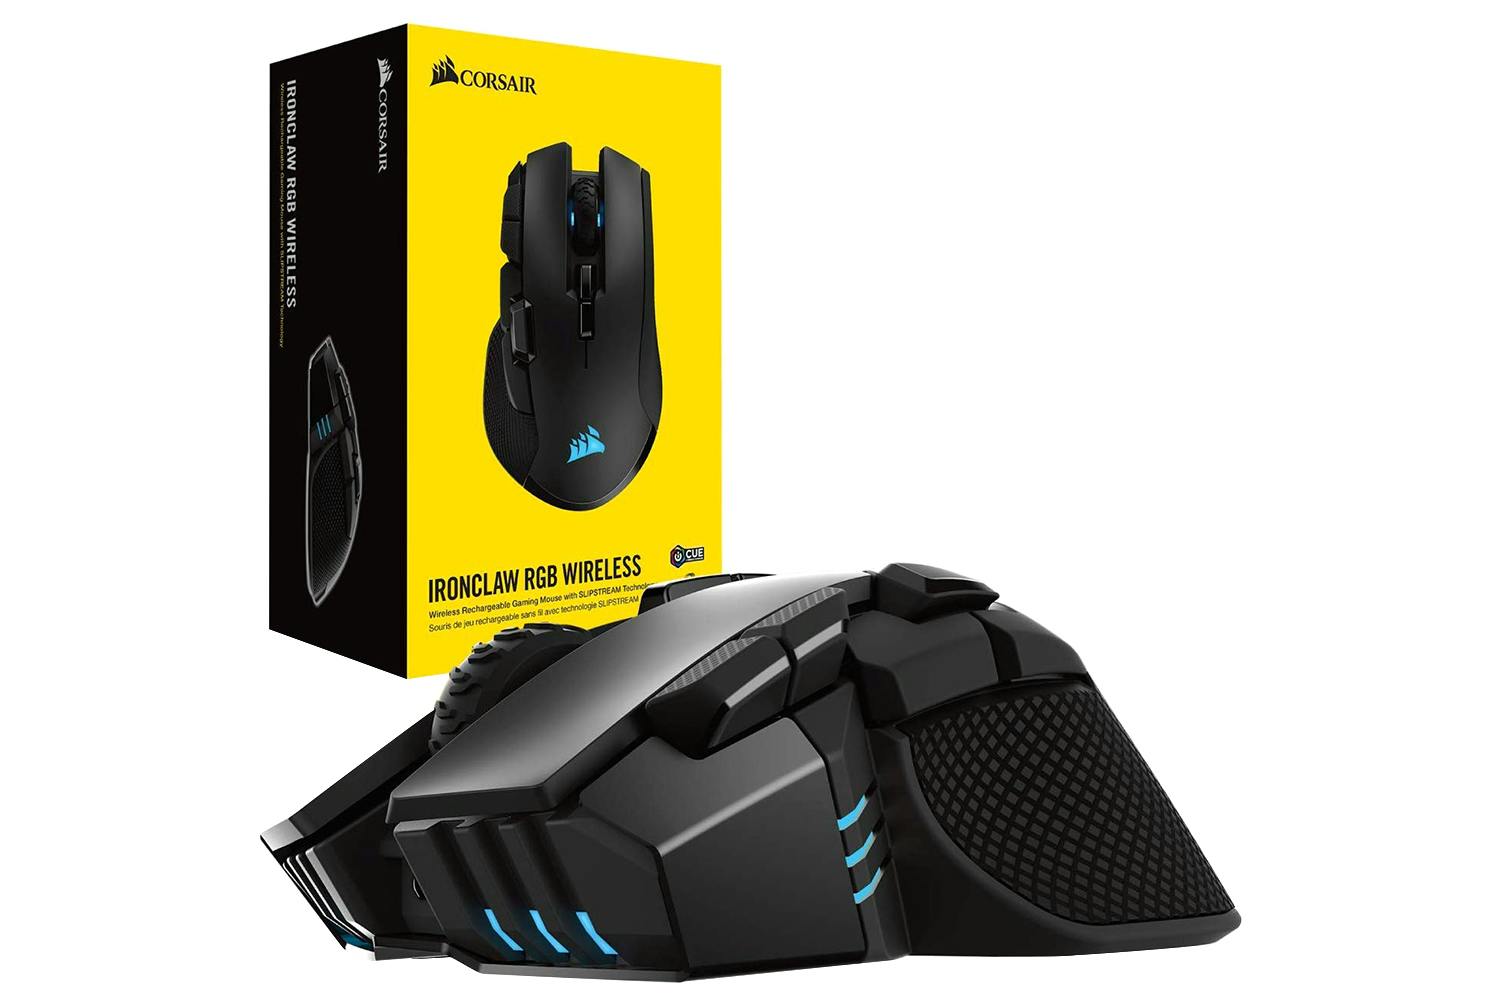 annoncere sten Nybegynder Corsair Ironclaw RGB Wireless Gaming Mouse | Ireland